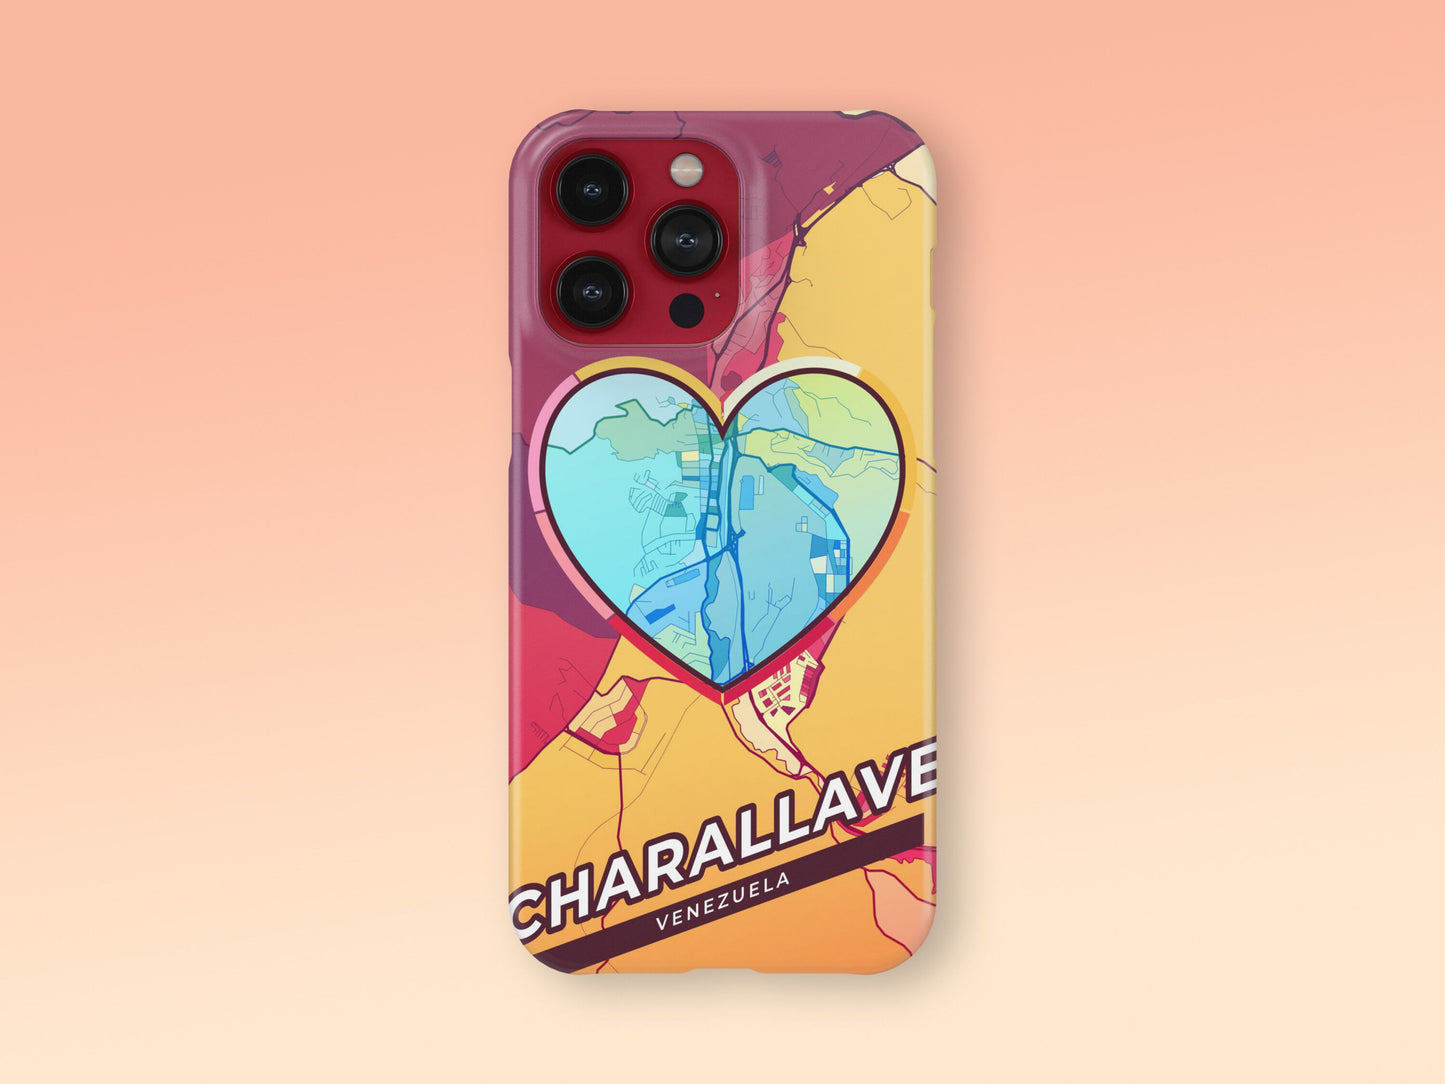 Charallave Venezuela slim phone case with colorful icon. Birthday, wedding or housewarming gift. Couple match cases. 2